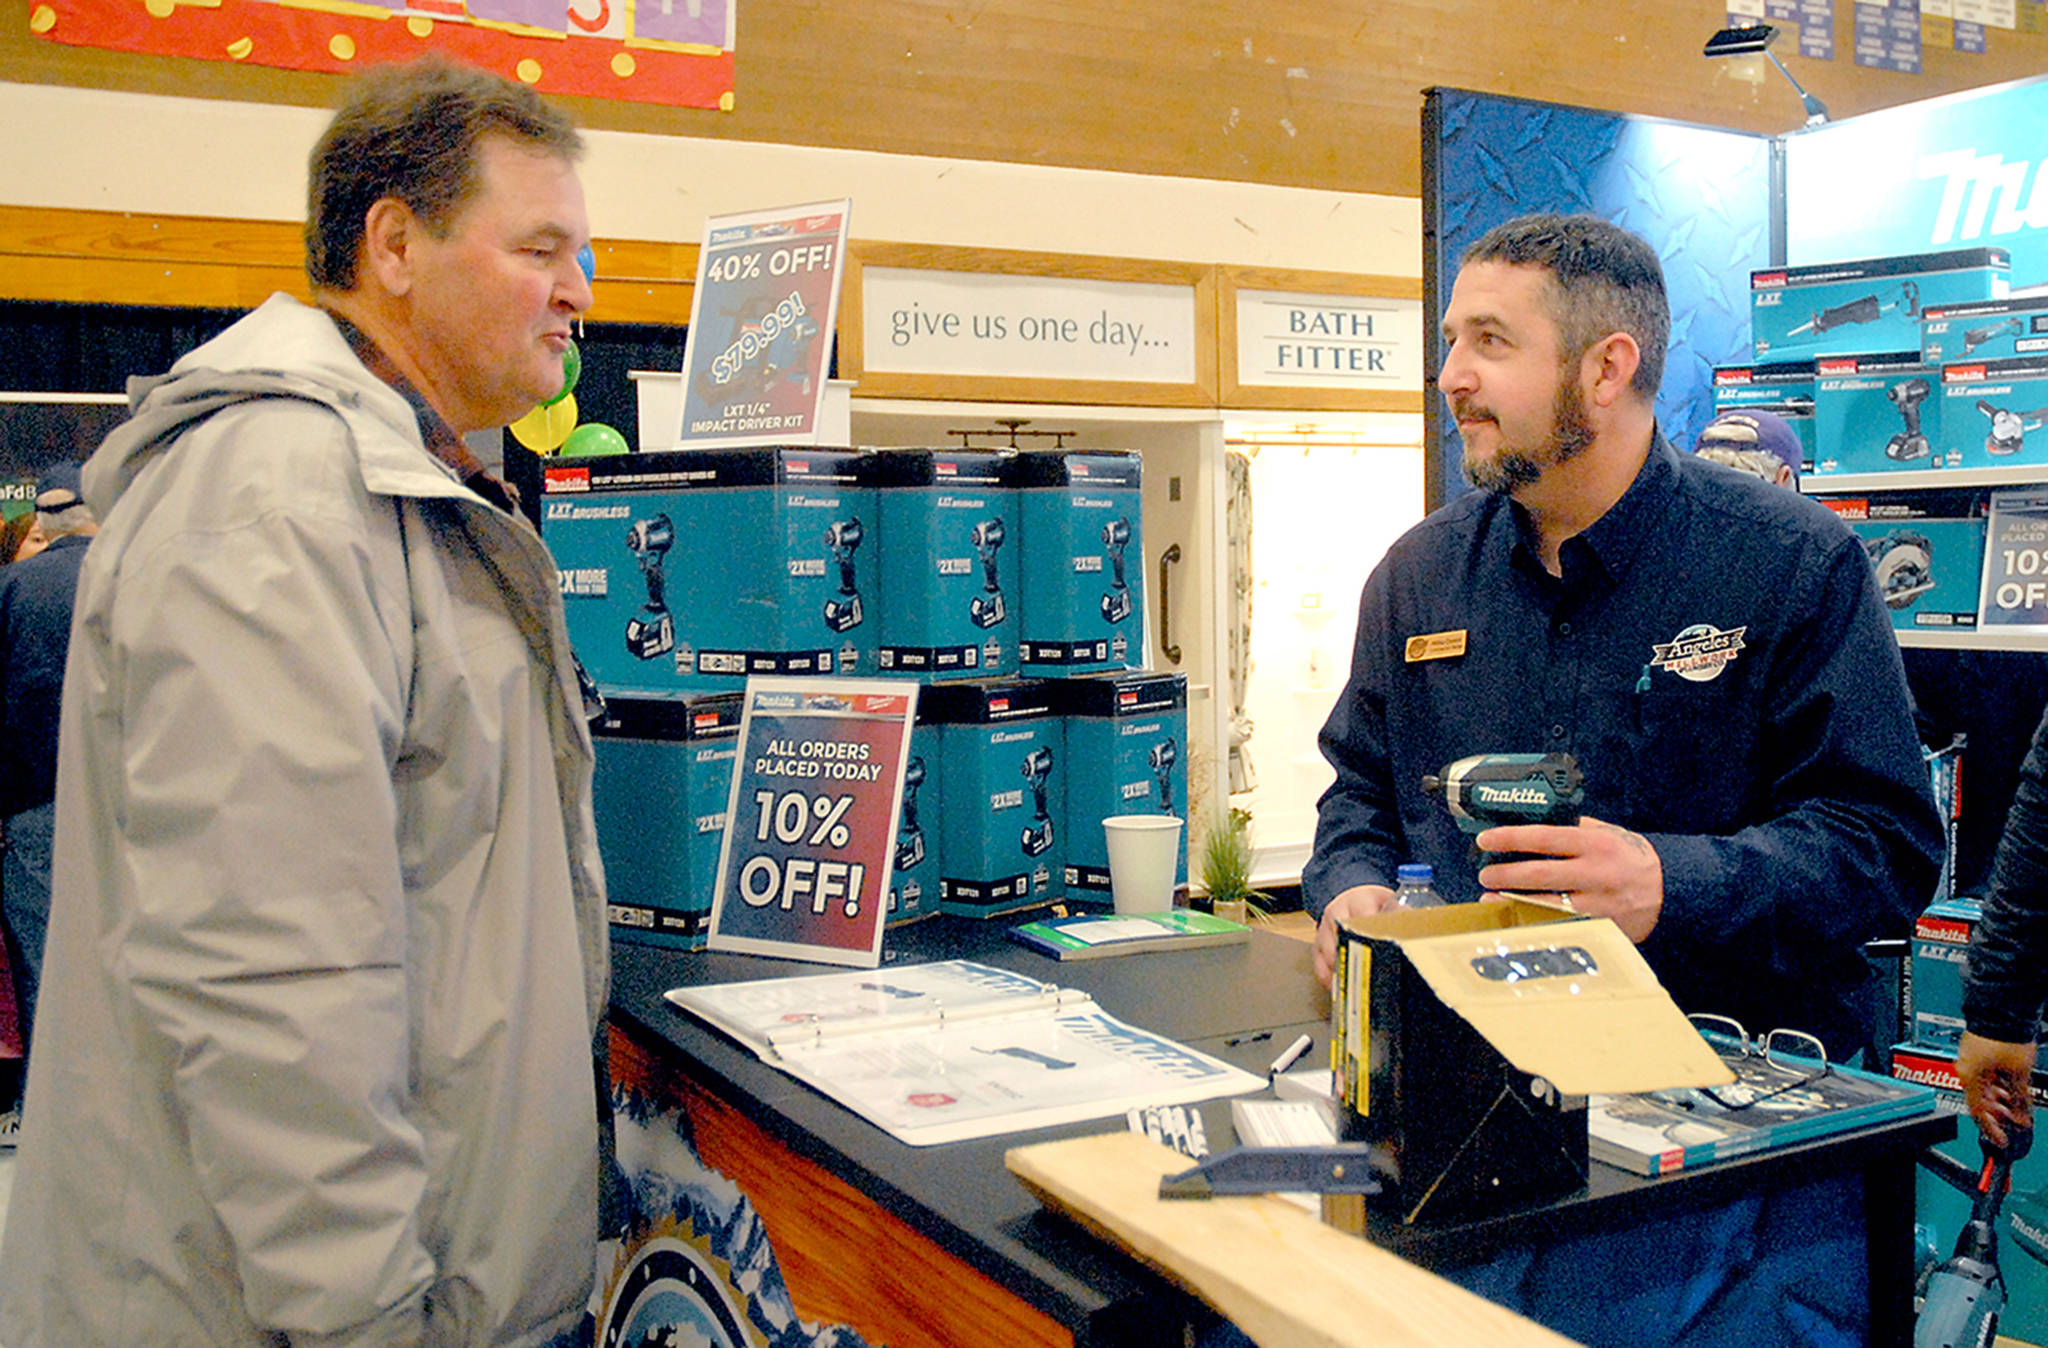 Building, Remodeling and Energy Expo continues in Sequim